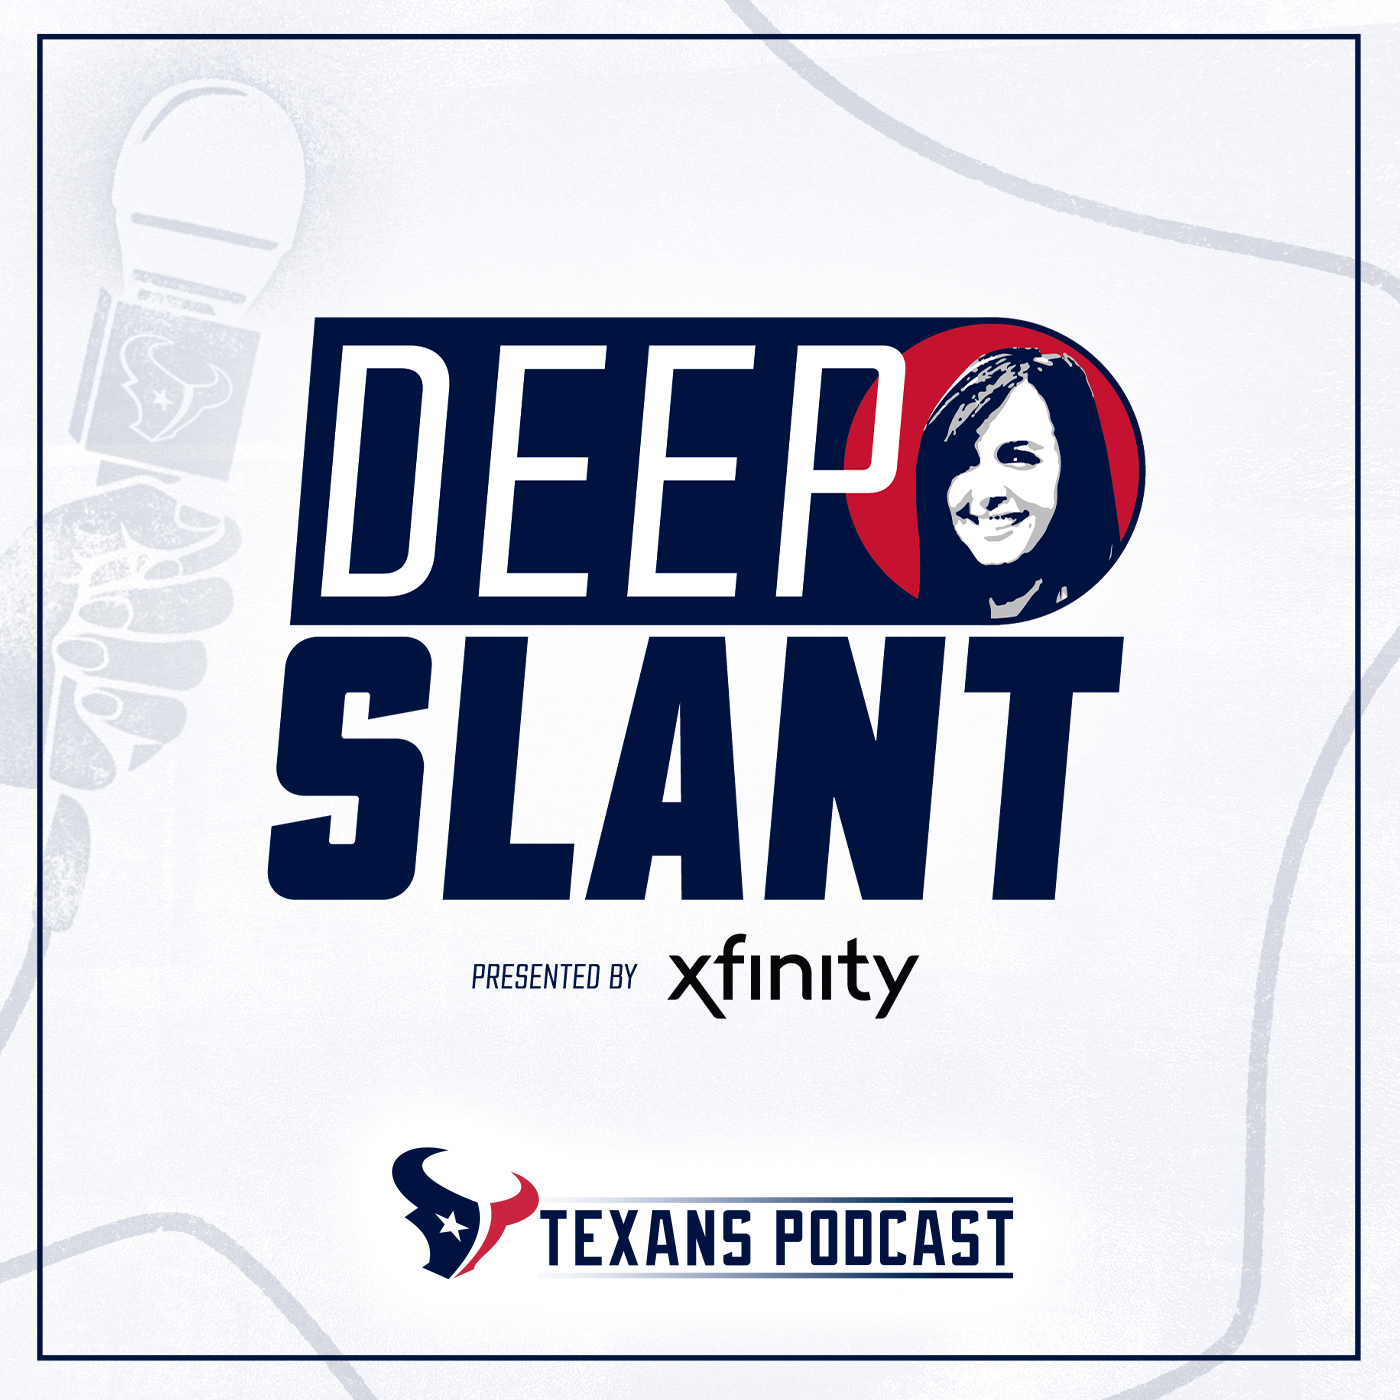 PFF analyst Sam Monson weighs in on Texans at the bye | Deep Slant